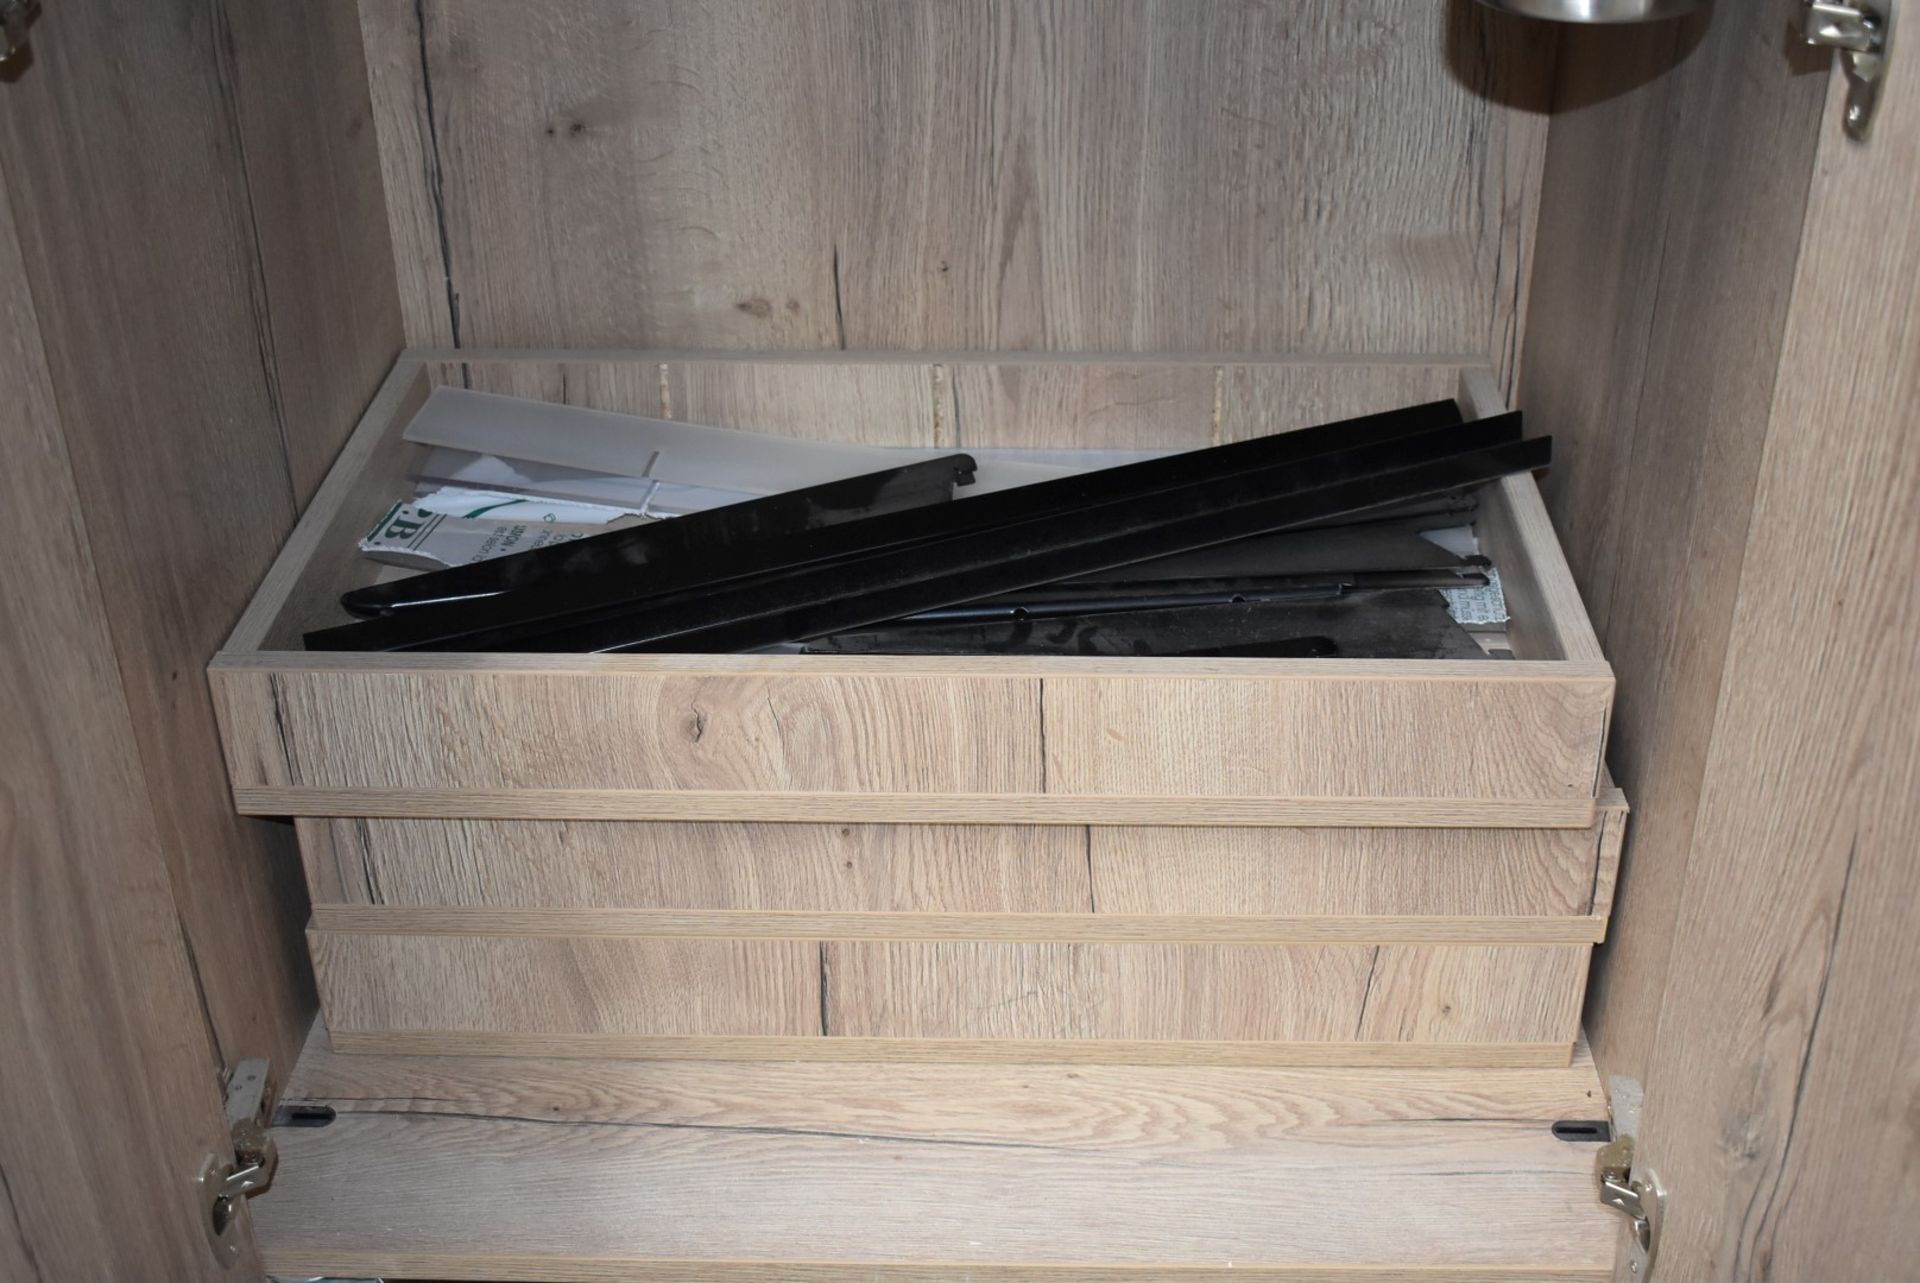 1 x Cutlery Service Trolley Featuring an Oak Cabinet With Internal Drawers, Stainless Steel - Image 10 of 13